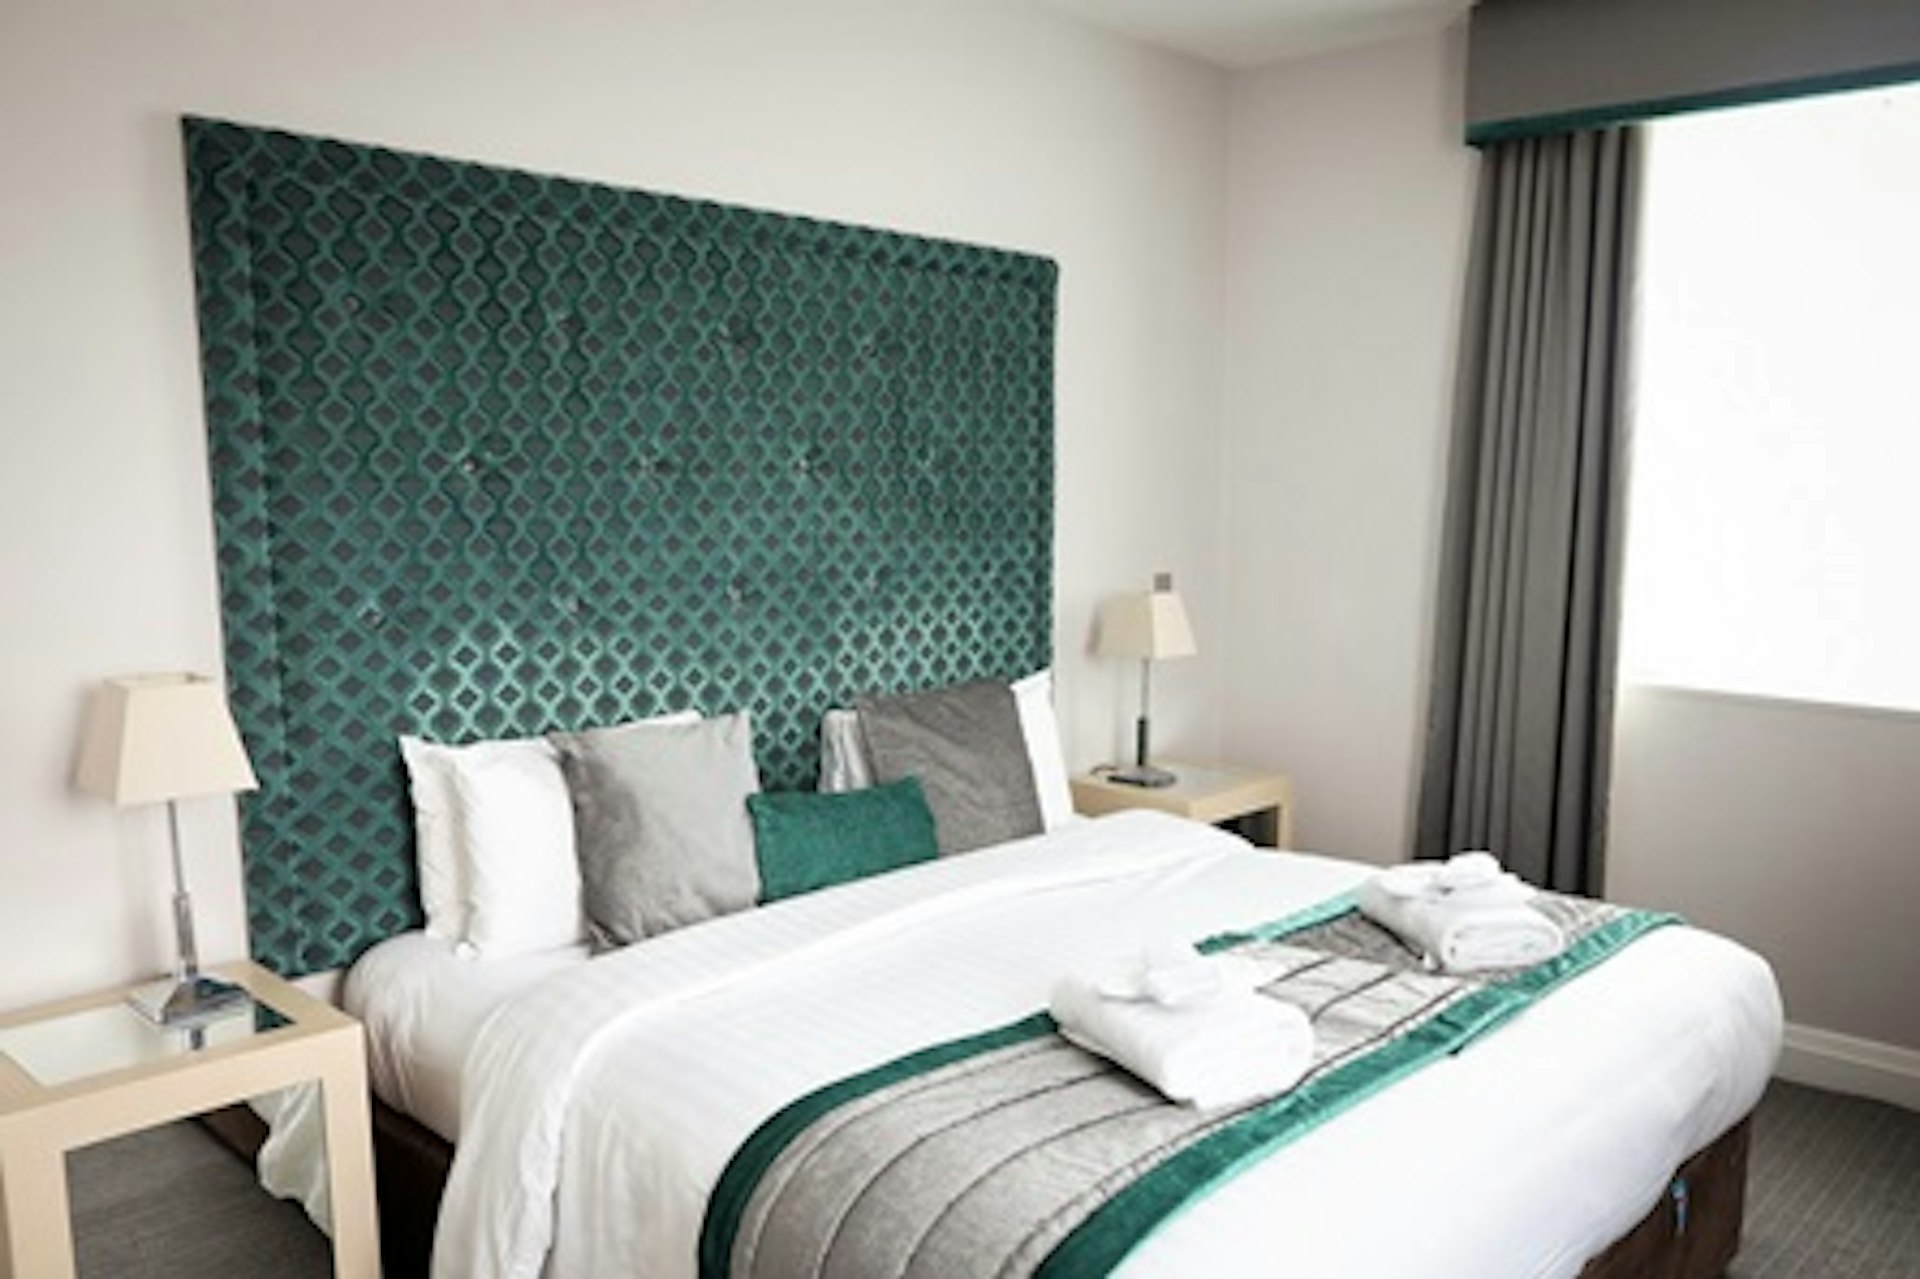 Deluxe One Night Spa Break with a Treatment and Dinner for Two at The Malvern Spa 1